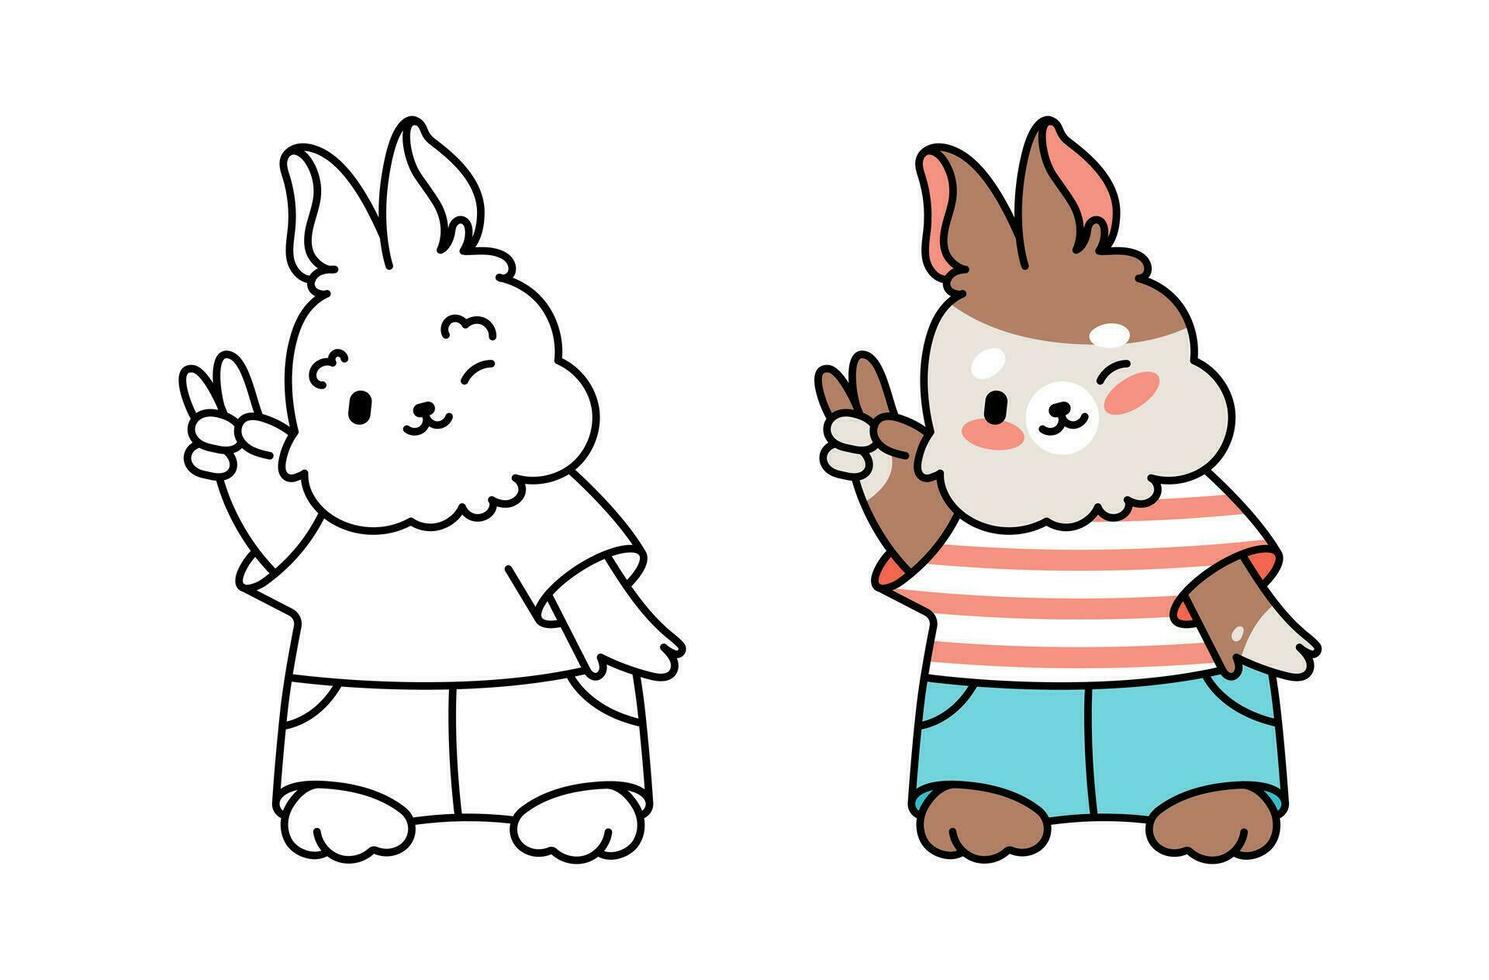 Coloring book for children with color sample, example. Boy bunny, bunny, hare smiling in a T-shirt and shorts. vector